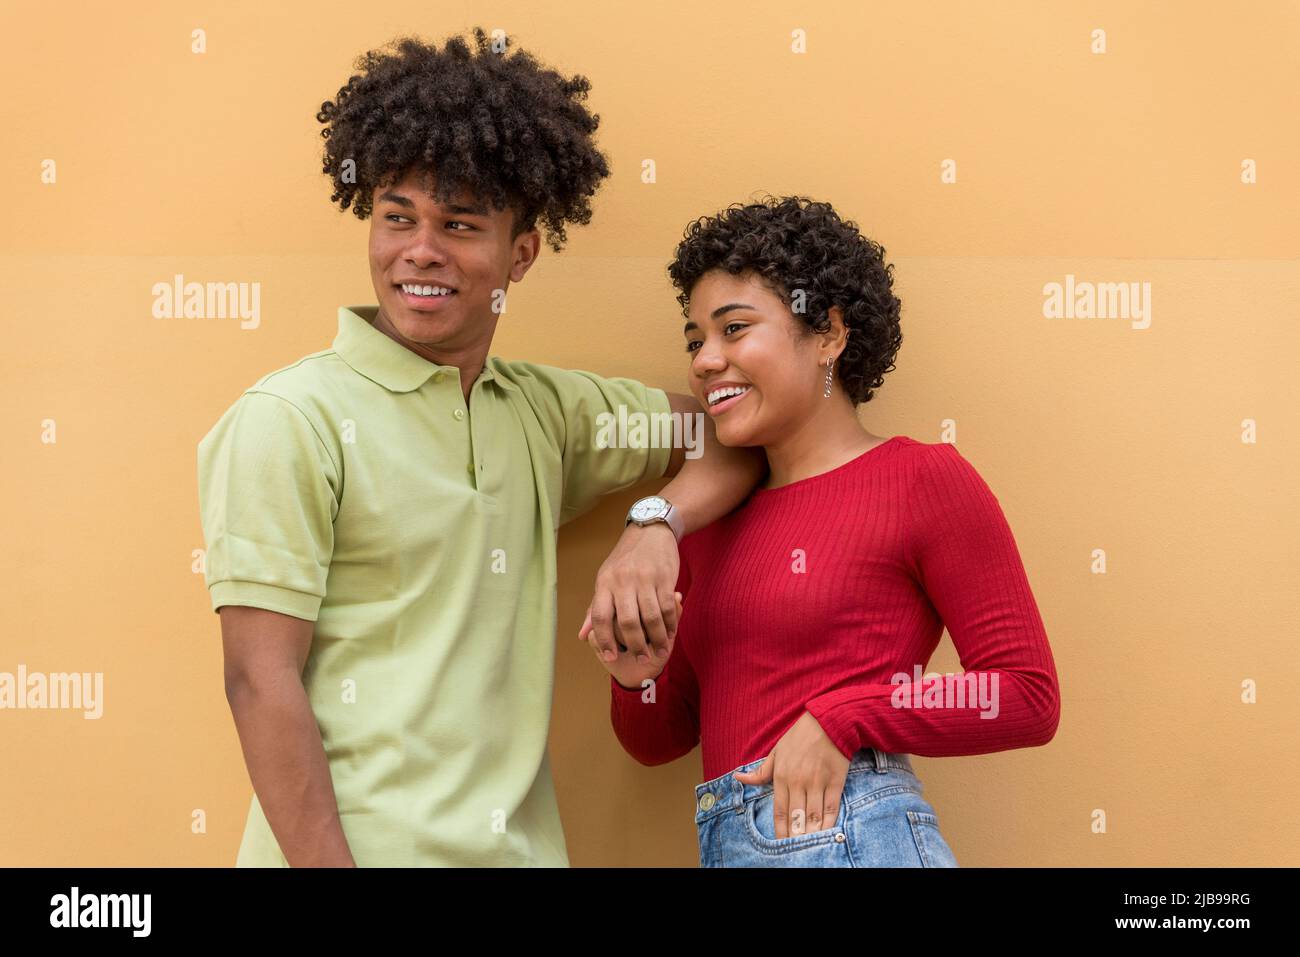 Portrait of smiling couple in front of wall, Panama city - stock photo Stock Photo